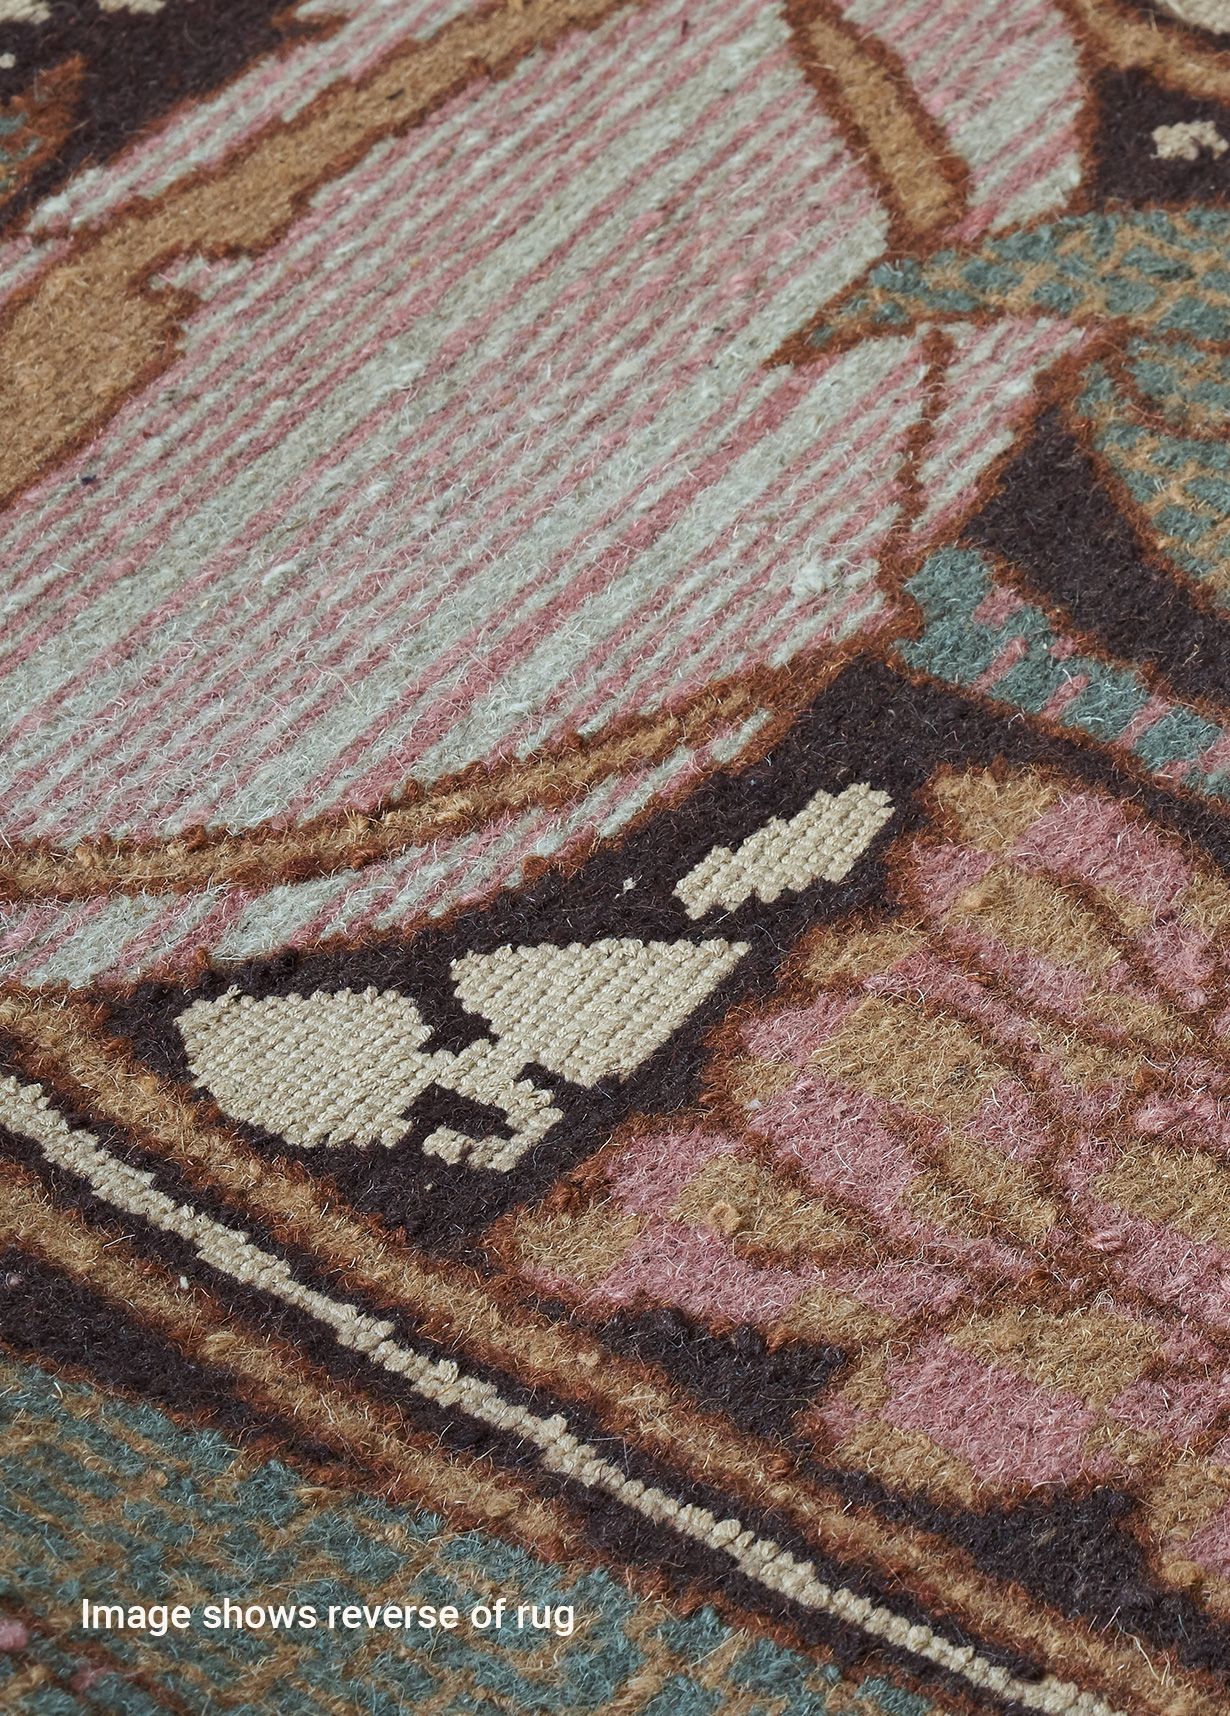 Santiago from the V&A Rug Collection